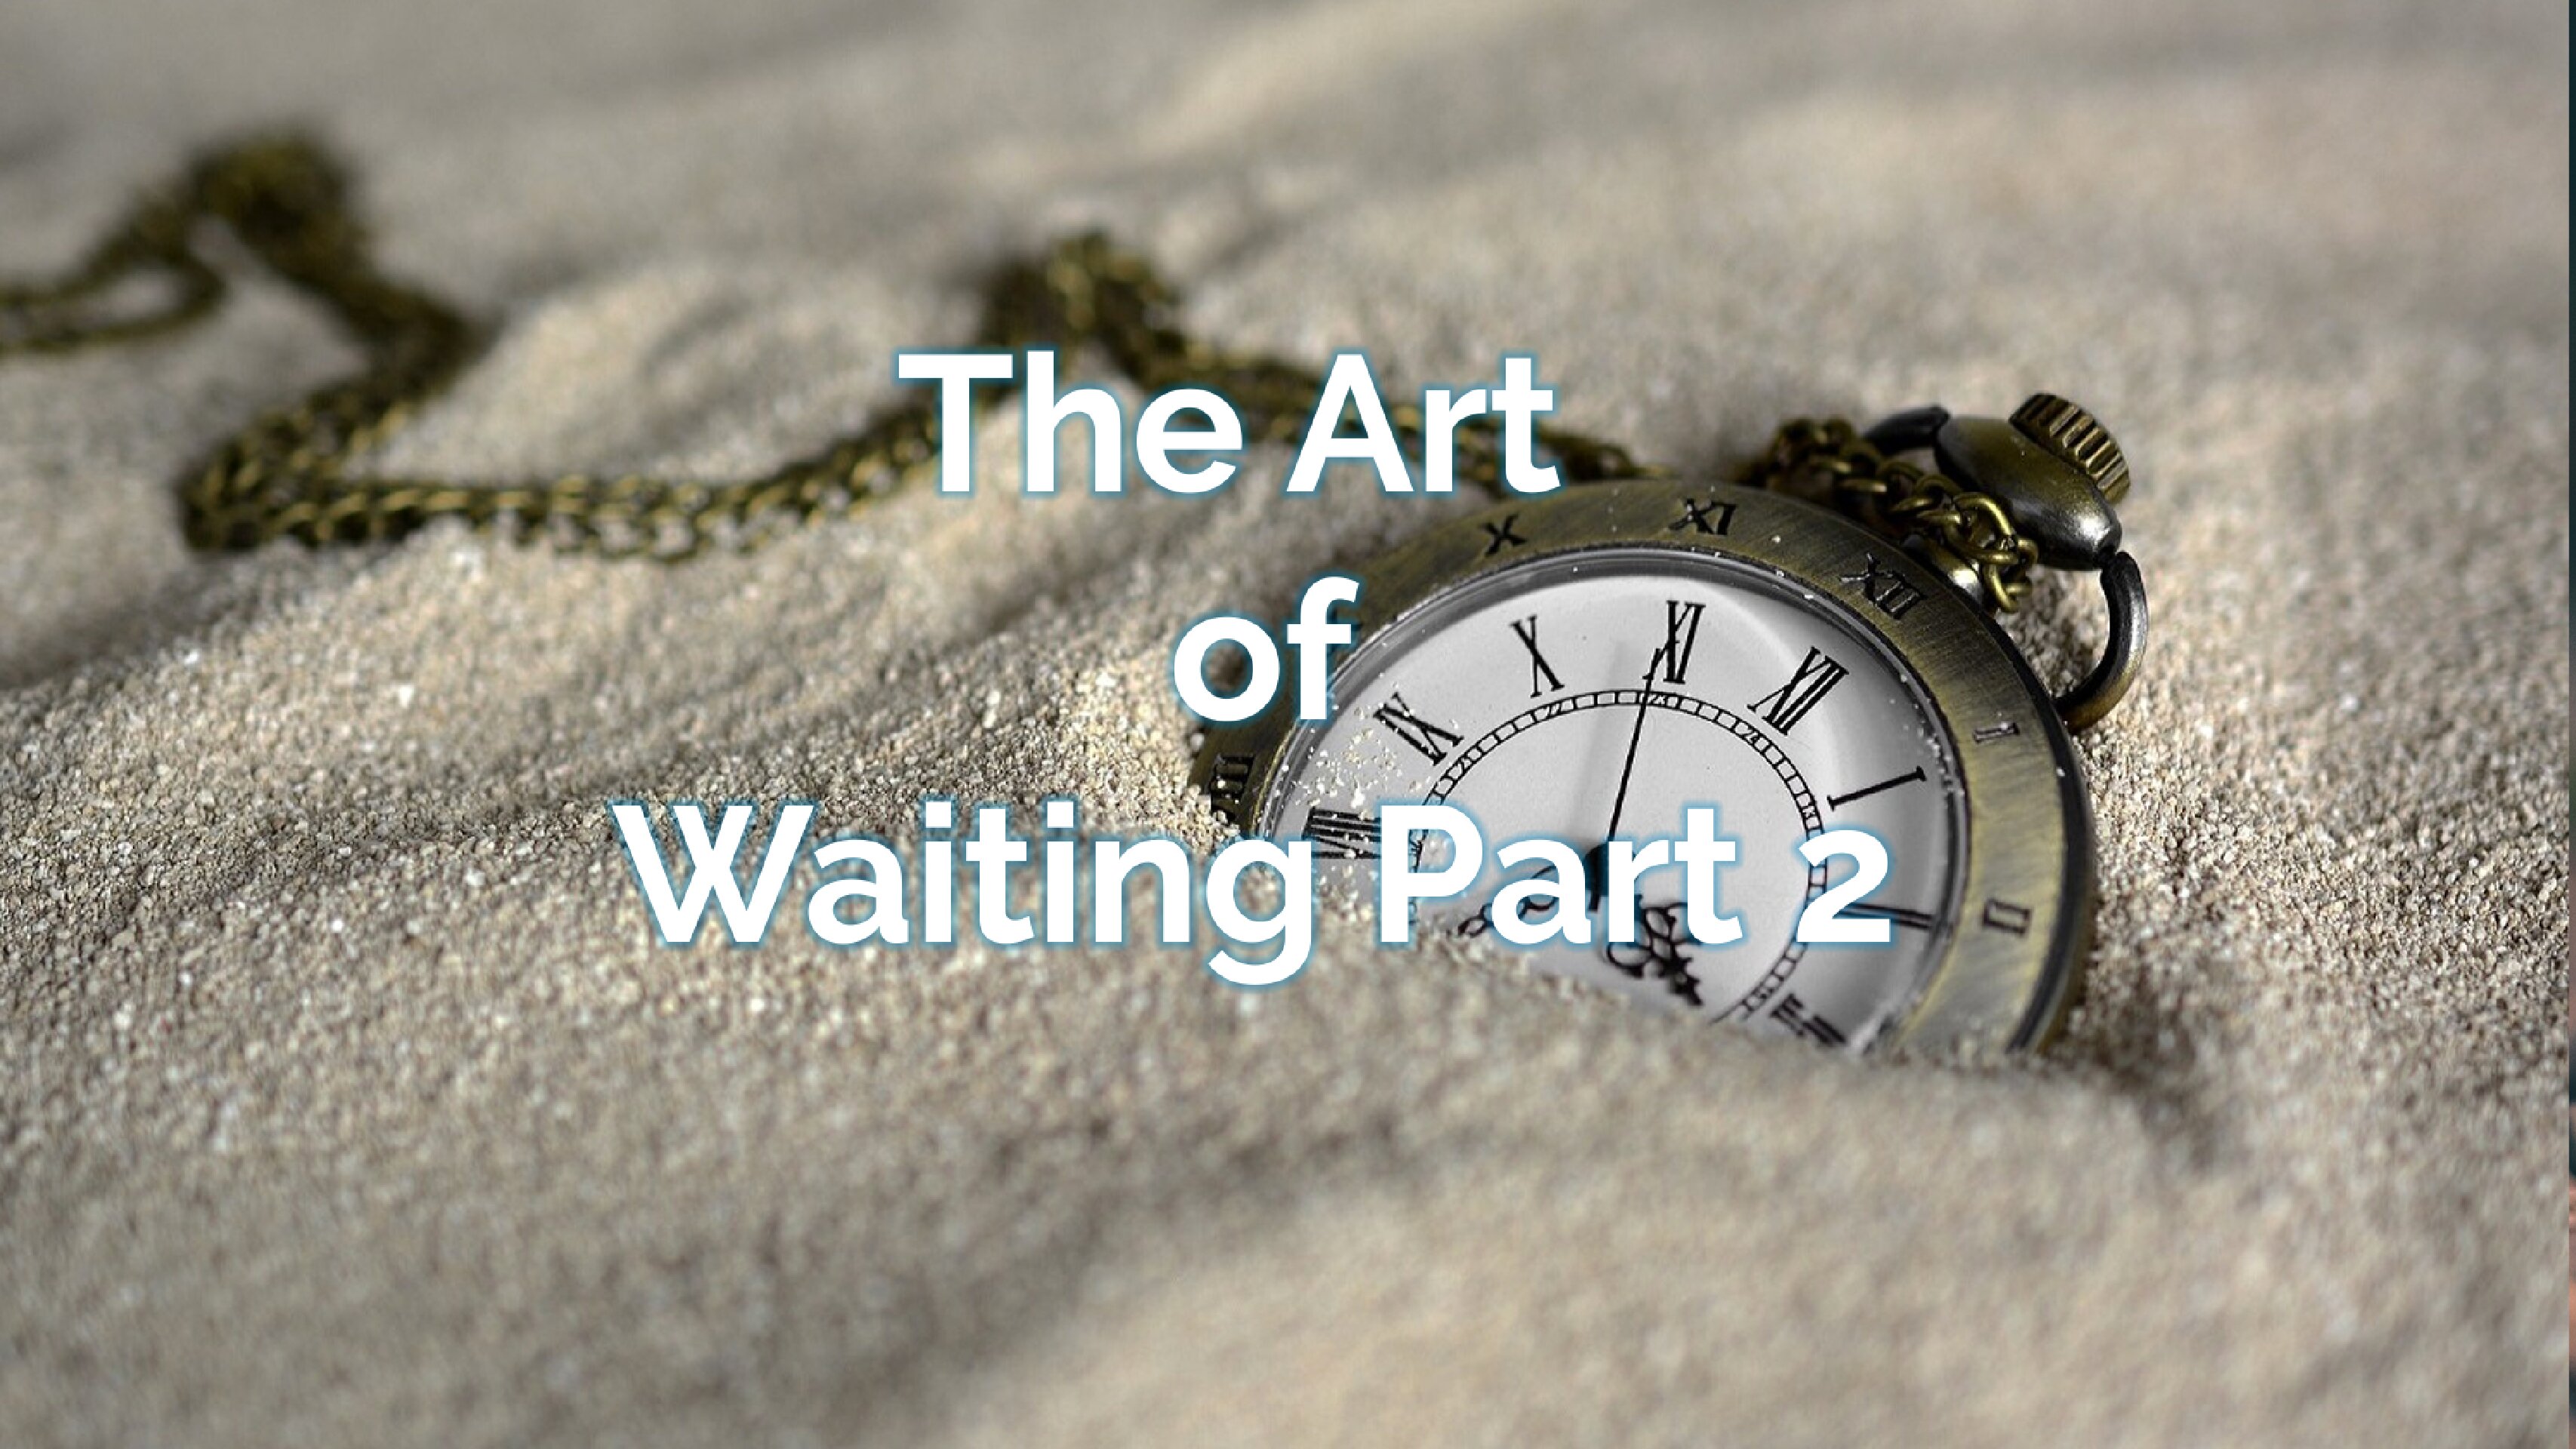 The Art of Waiting Part 2